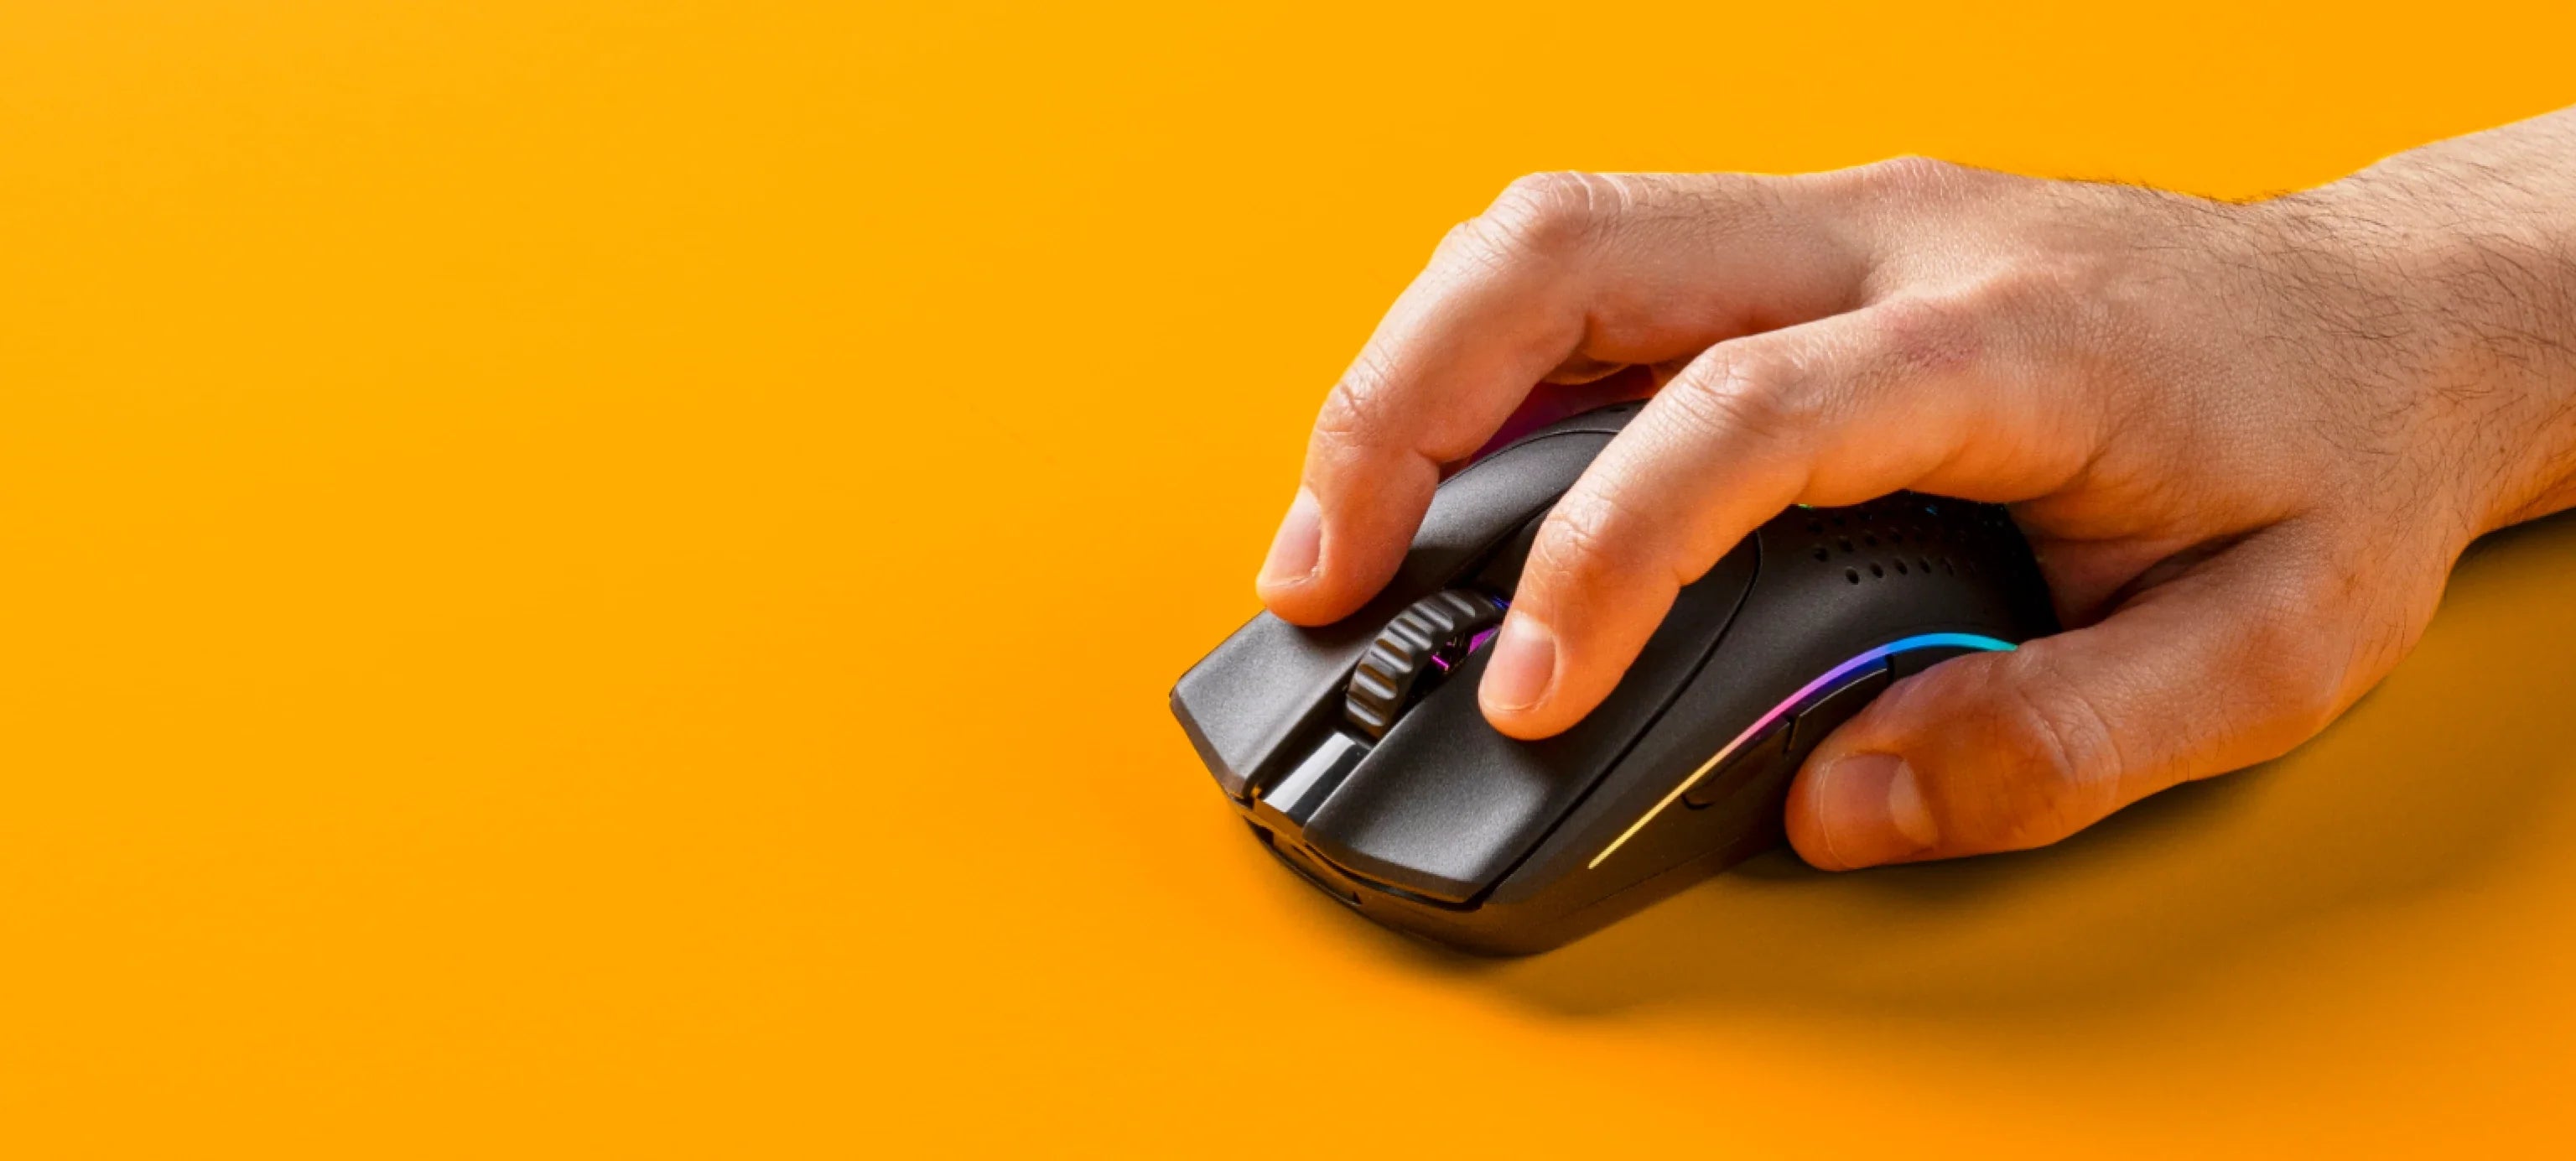 Hand holding a Model O 2 Wireless in Black on an orange background